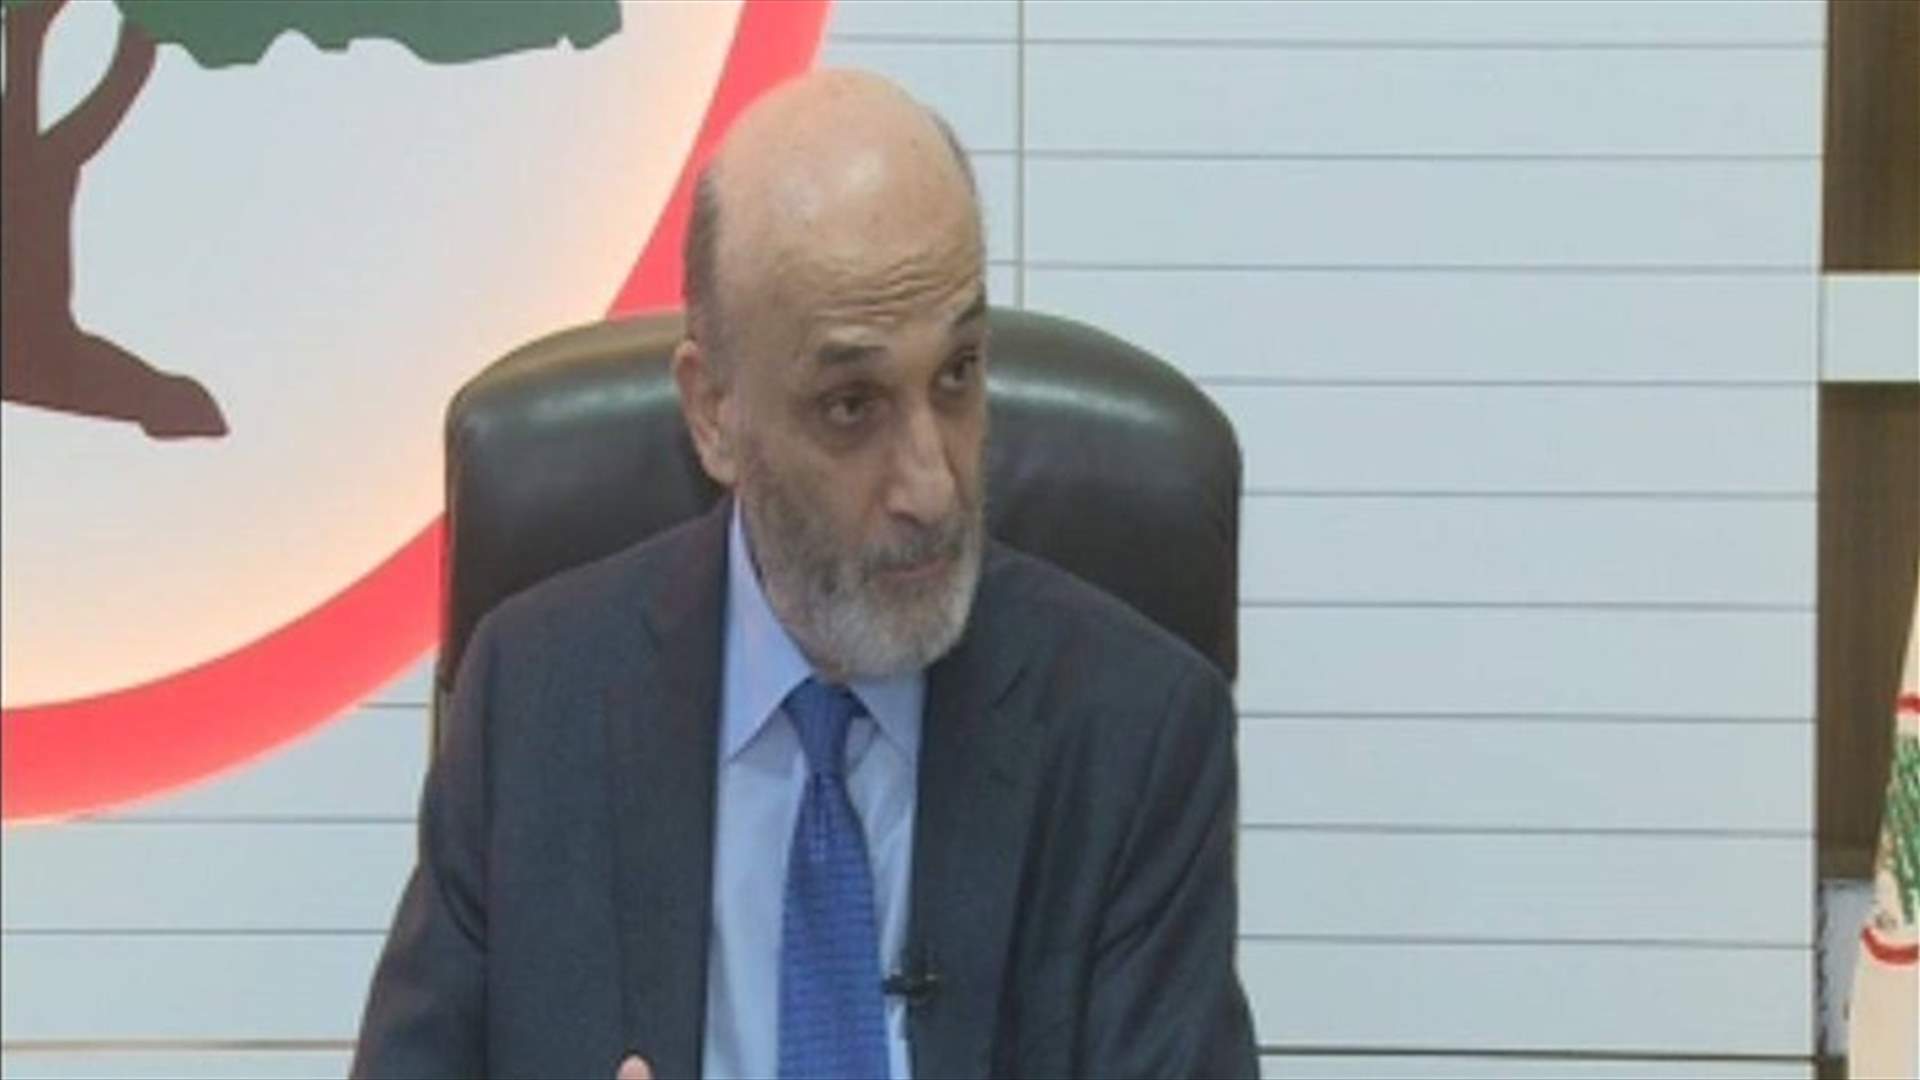 Geagea to LBCI: Lebanon’s financial situation very critical, requires detailed plan